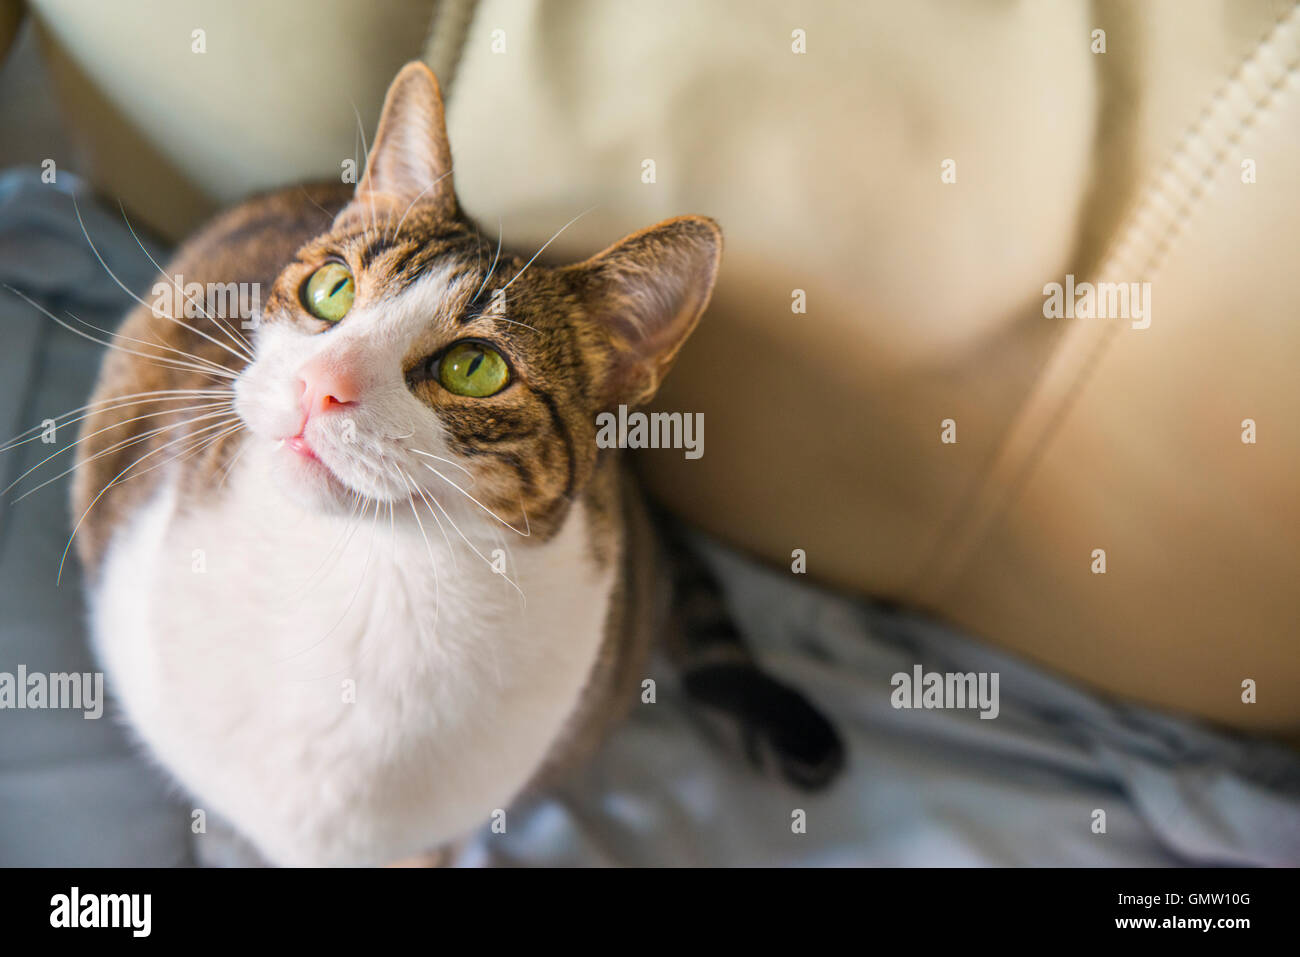 Tabby and white cat, view from above. Stock Photo